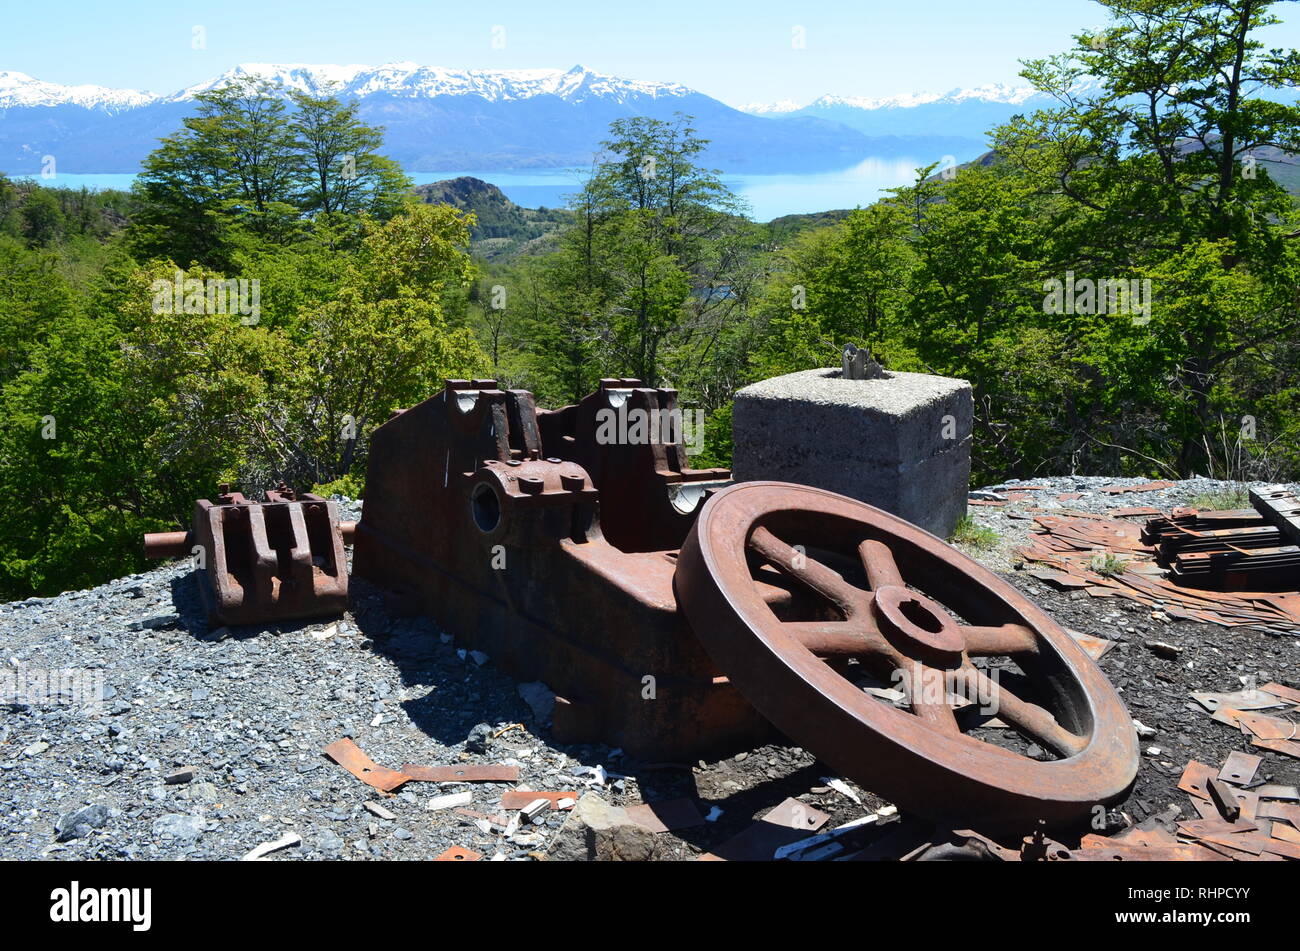 Rusty industrial machinery at Mina Escondida, an abandoned lead, zinc and copper mine near Puerto Guadal, Chile Stock Photo